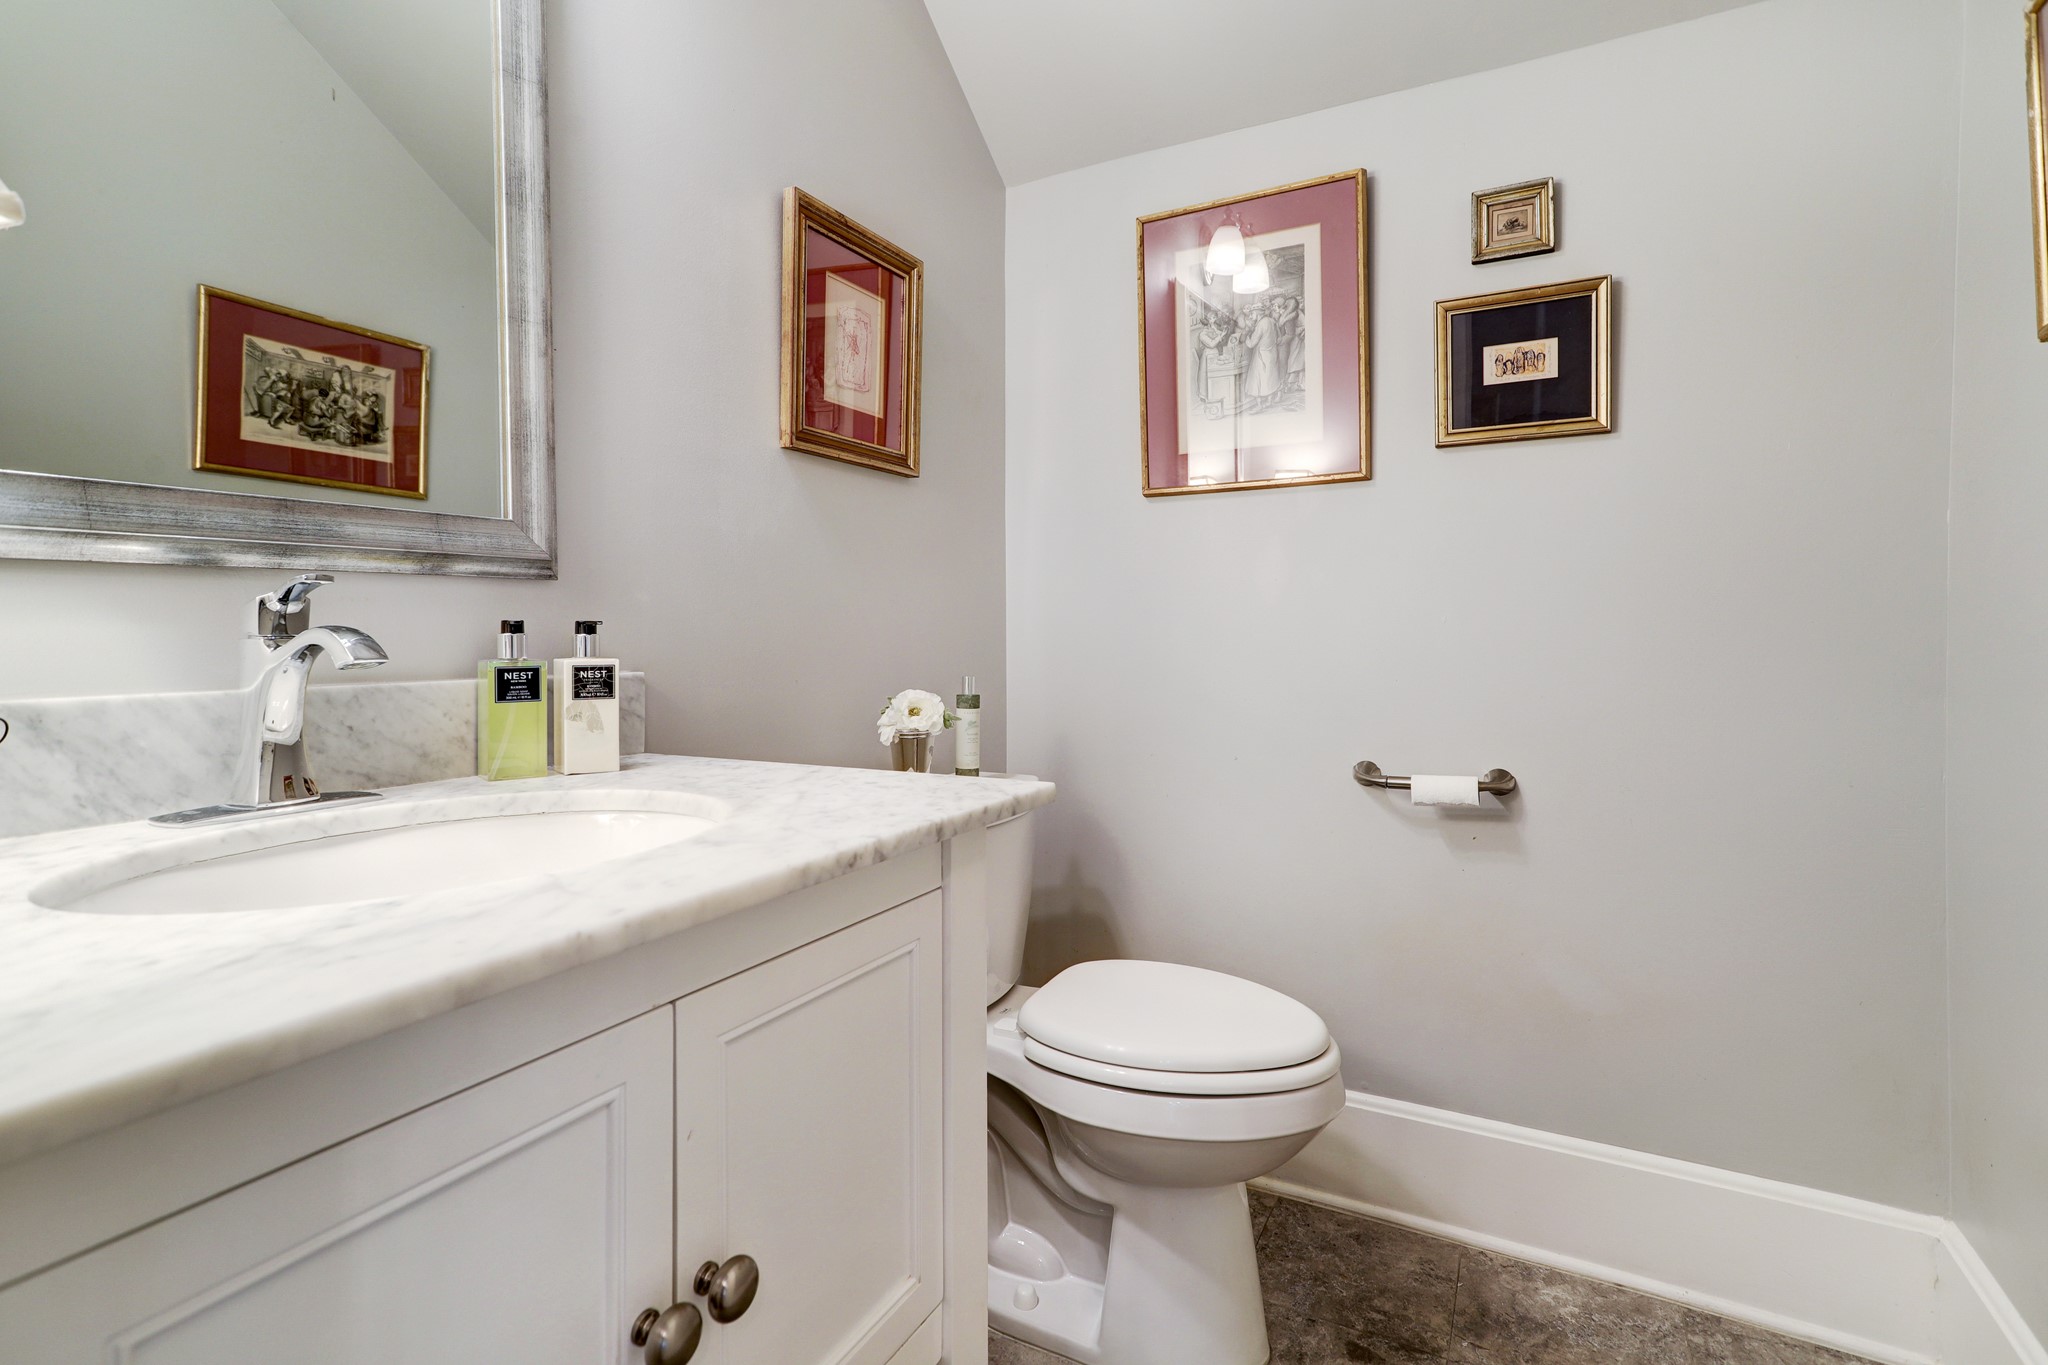 Located off of the foyer is a powder bathroom with beautiful marble counter tops, tile flooring, and under sink storage.